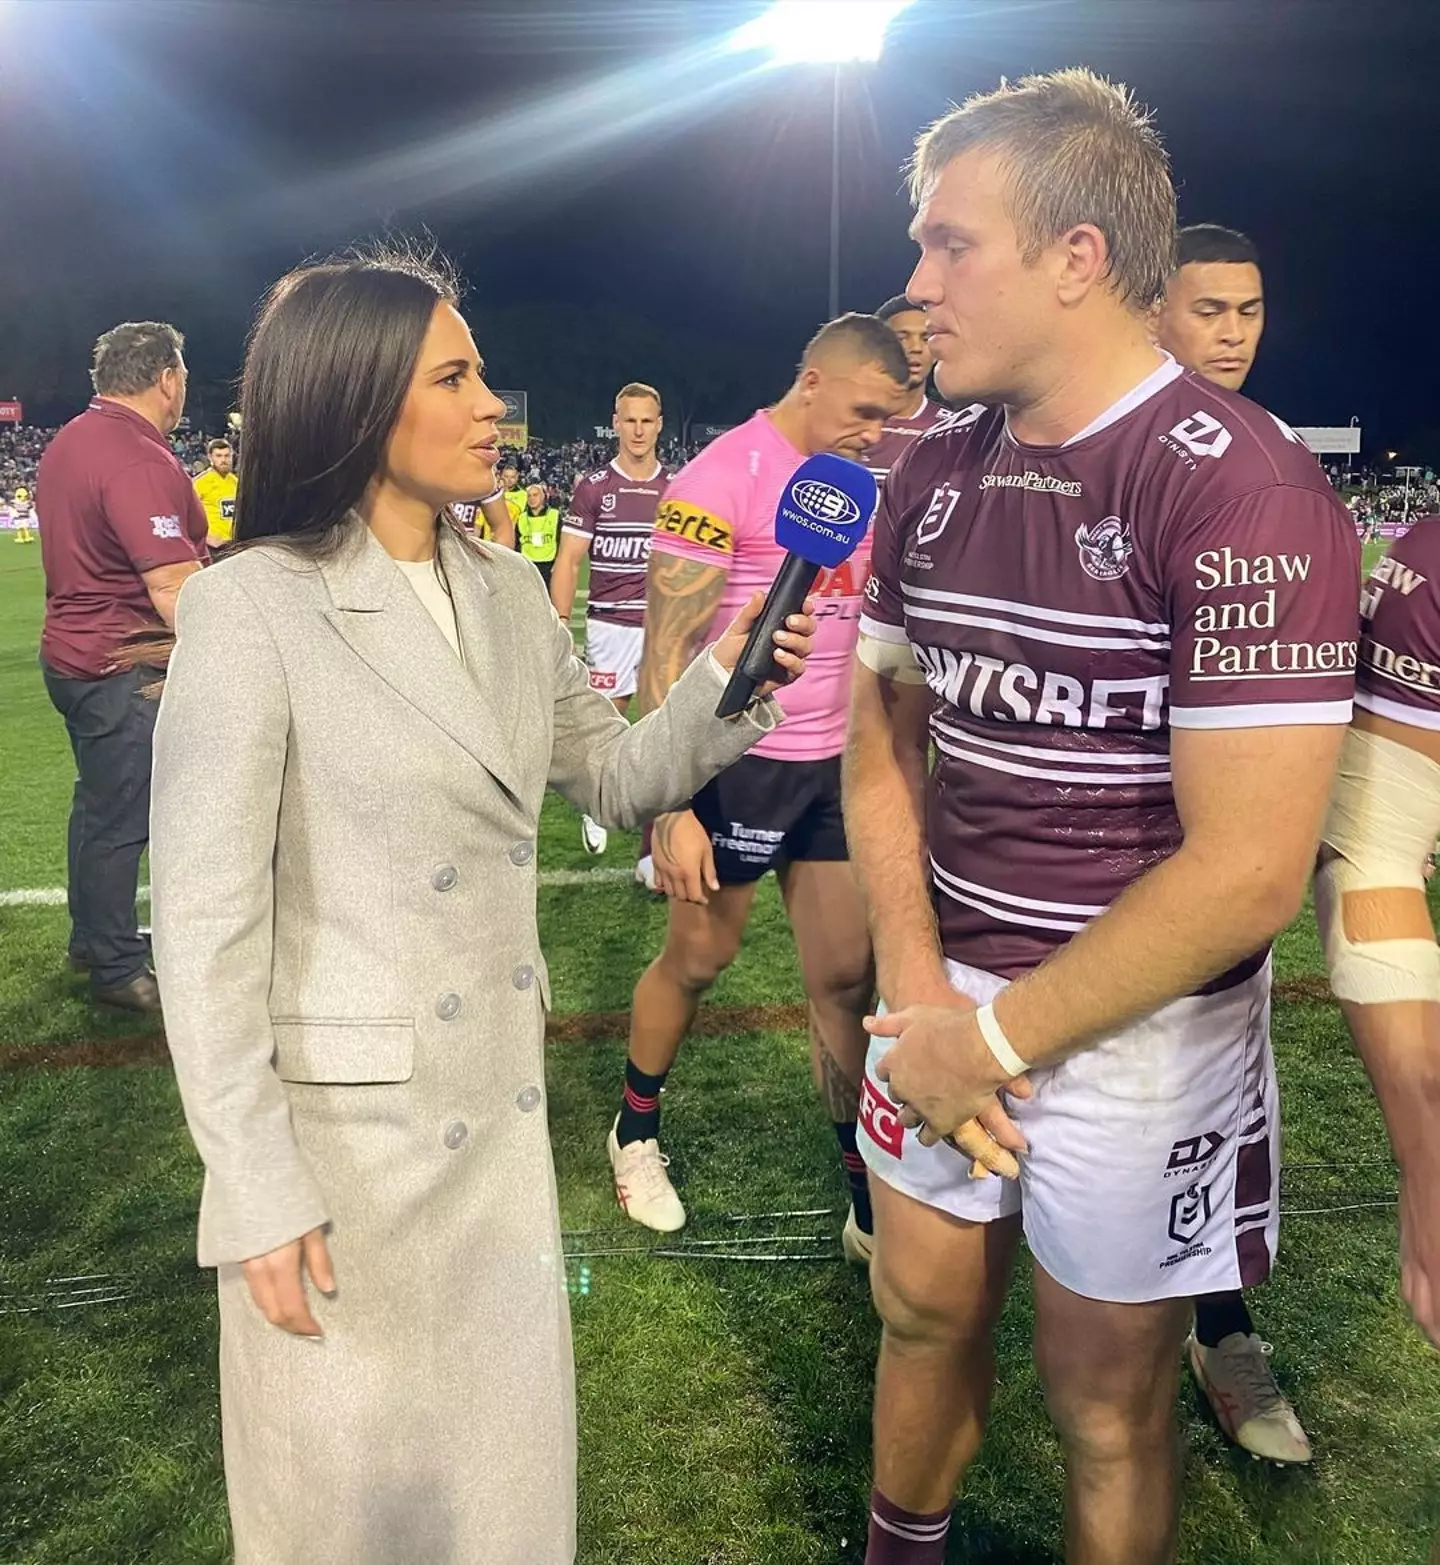 Danika Mason working for Channel 9's NRL coverage.